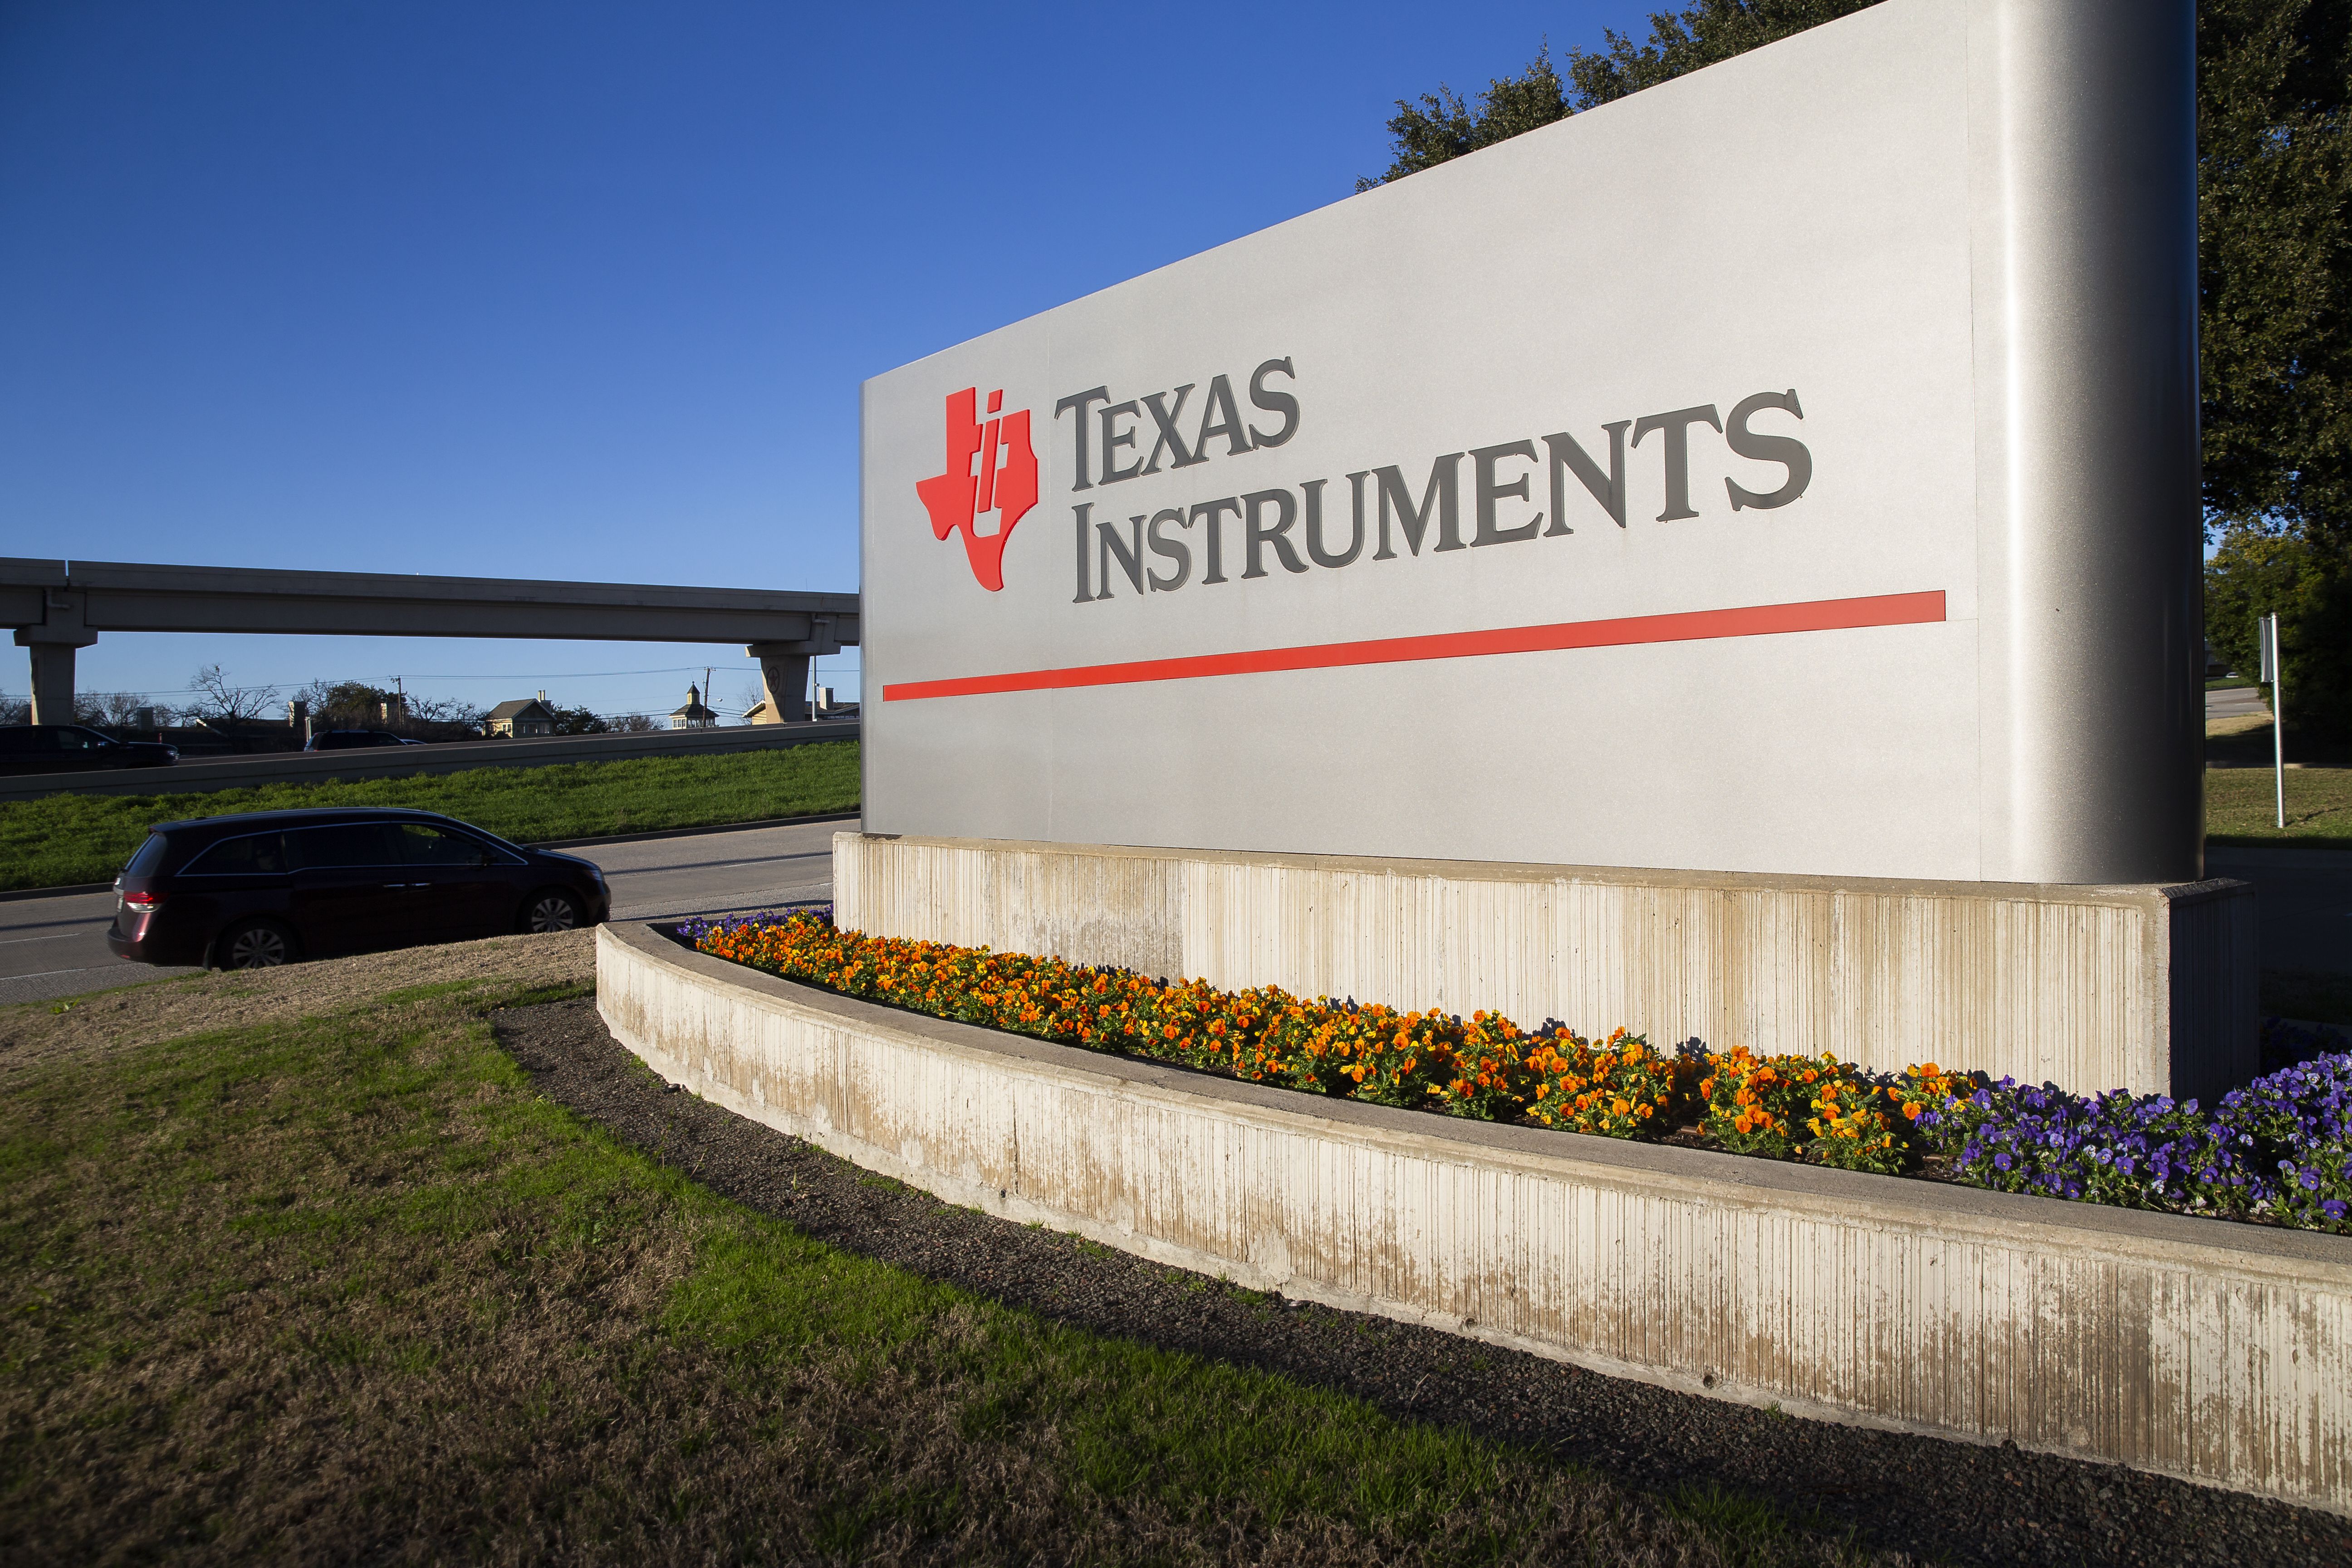 What Do You Know About Texas Instruments?